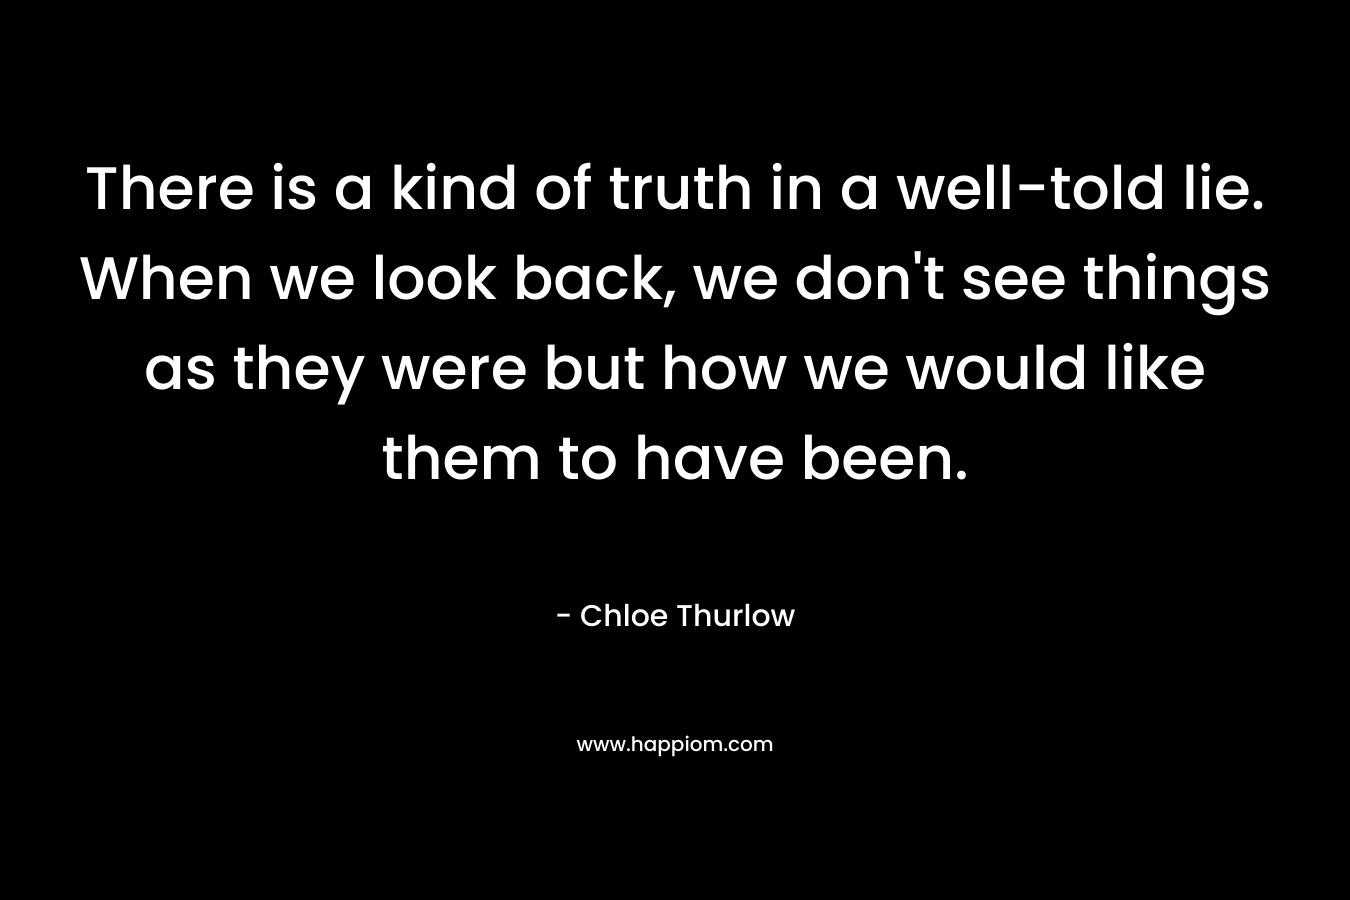 There is a kind of truth in a well-told lie. When we look back, we don't see things as they were but how we would like them to have been.